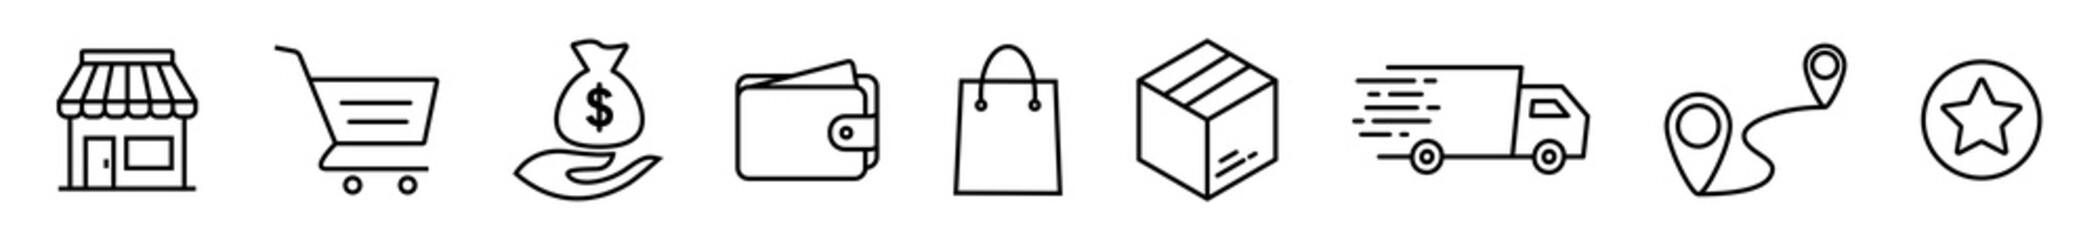 Shopping Icon in line style. Simple set of online shop market vector icon. Contains such Icons as money, fund, order, wallet, purse, bag, collect, box, delivery truck, and more. e-commerce business